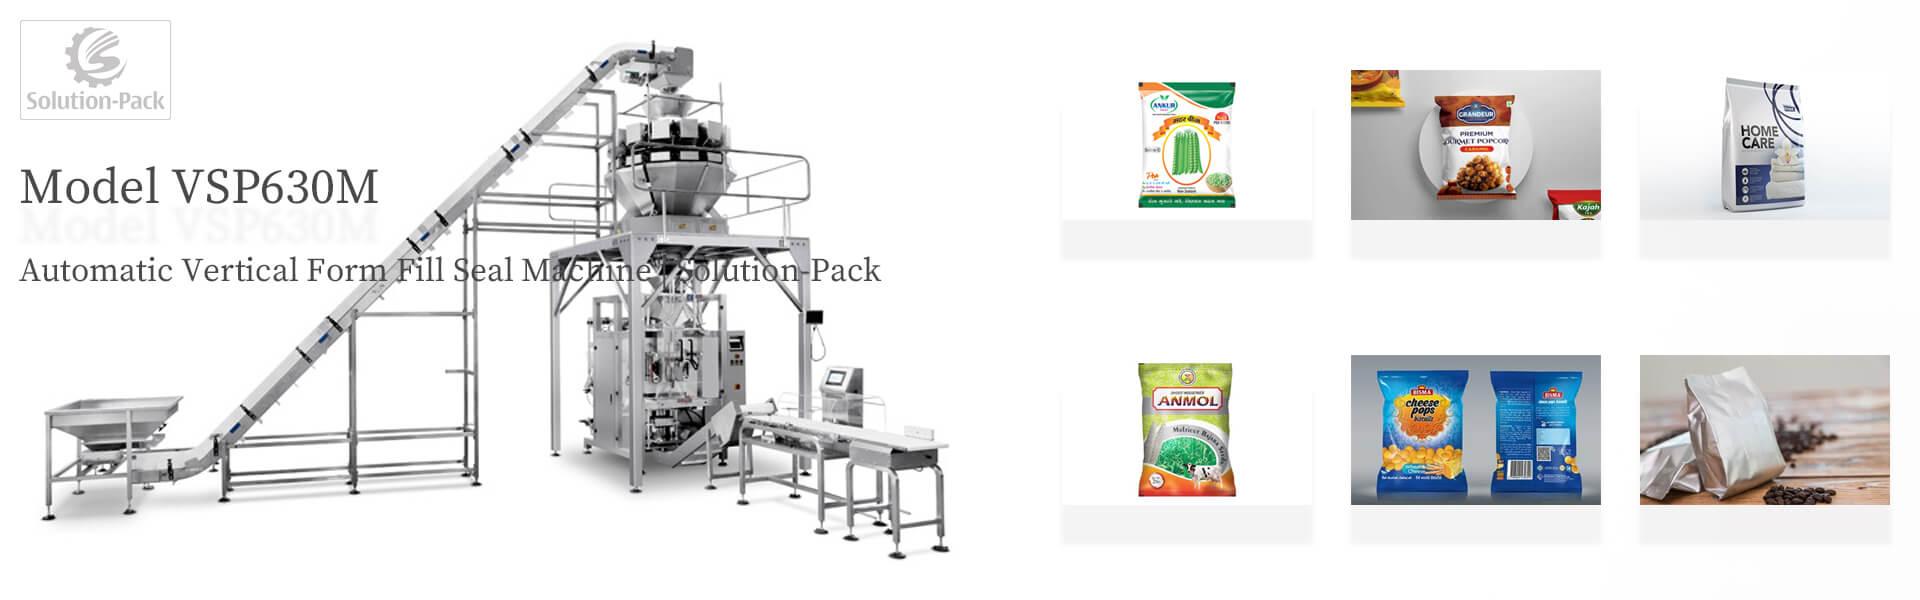 Solution-Pack | Model VSP630M Automatic Vertical Form Fill Seal Machine | Head Banner Picture